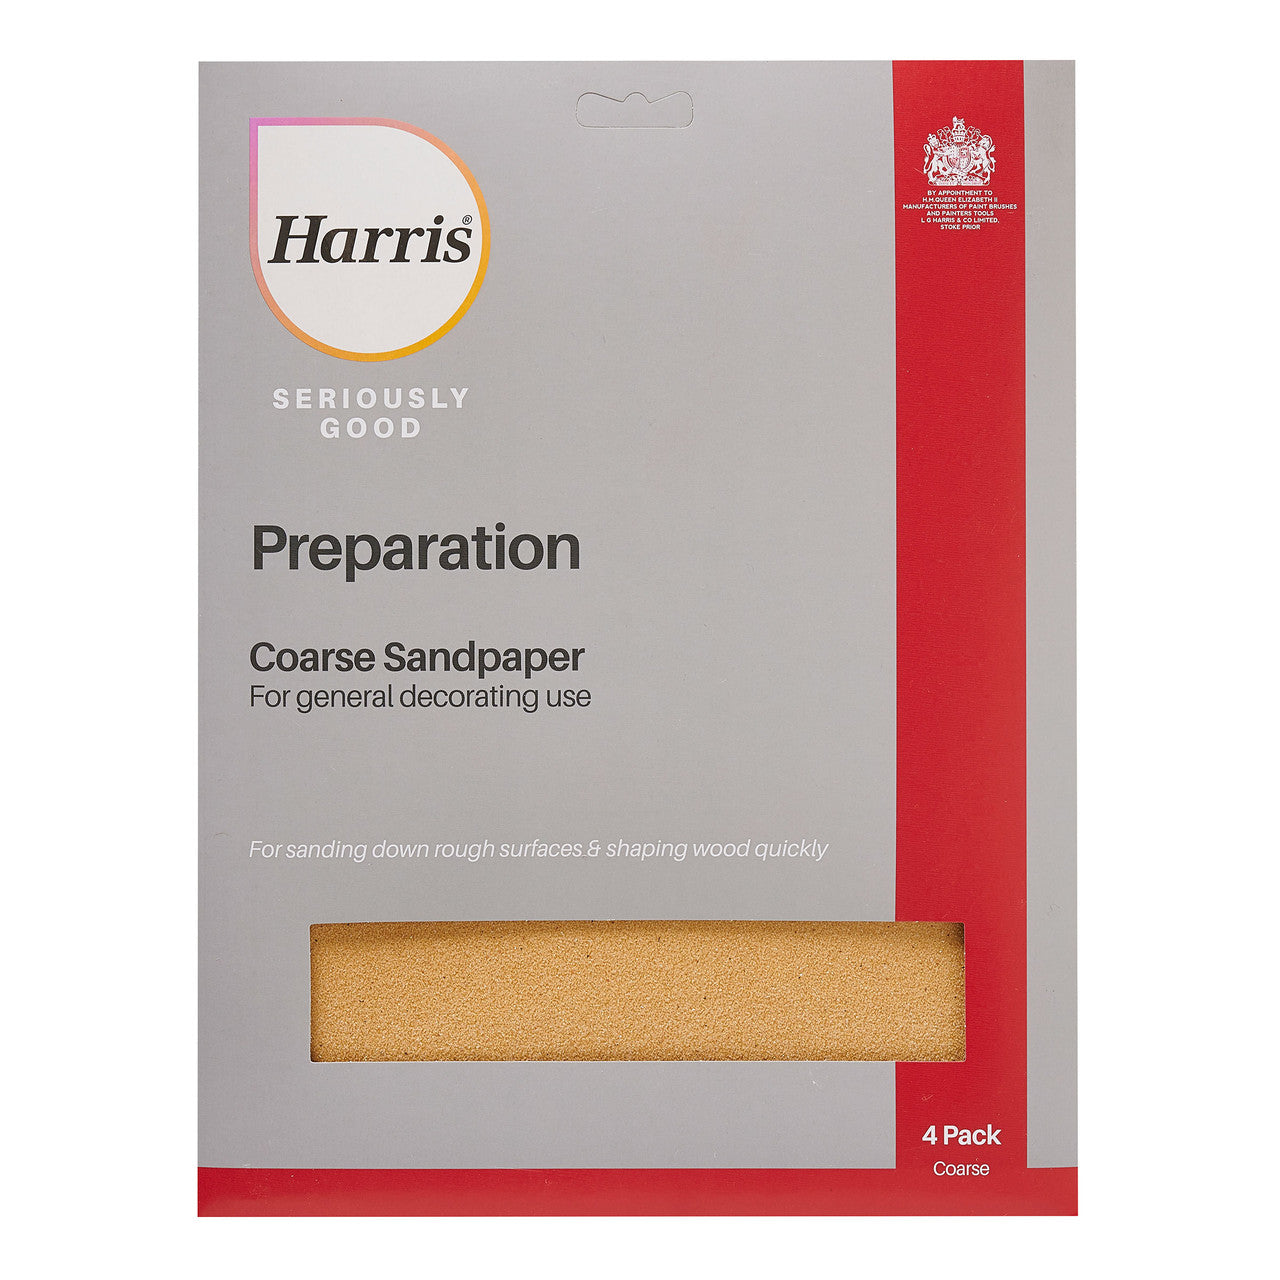 Harris 102064320 Seriously Good Sandpaper Coarse Pack of 4